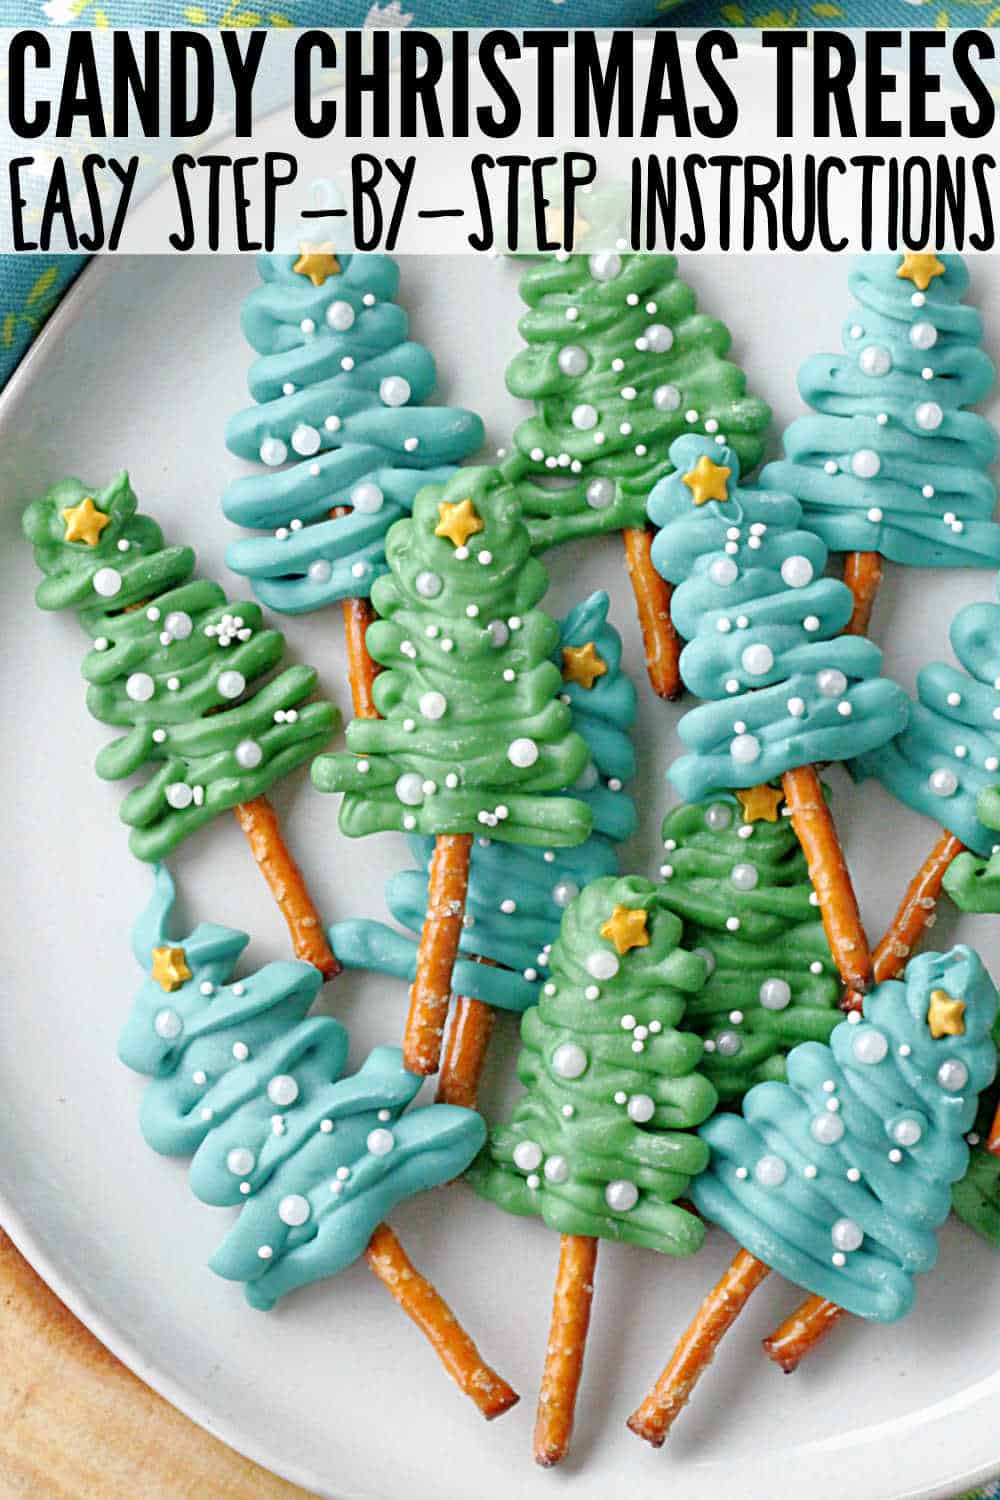 These Christmas Tree Cupcake Toppers are a simple and festive way to decorate a dozen cupcakes for the holidays. Made with pretzel sticks, candy melts and sprinkles. via @foodtasticmom